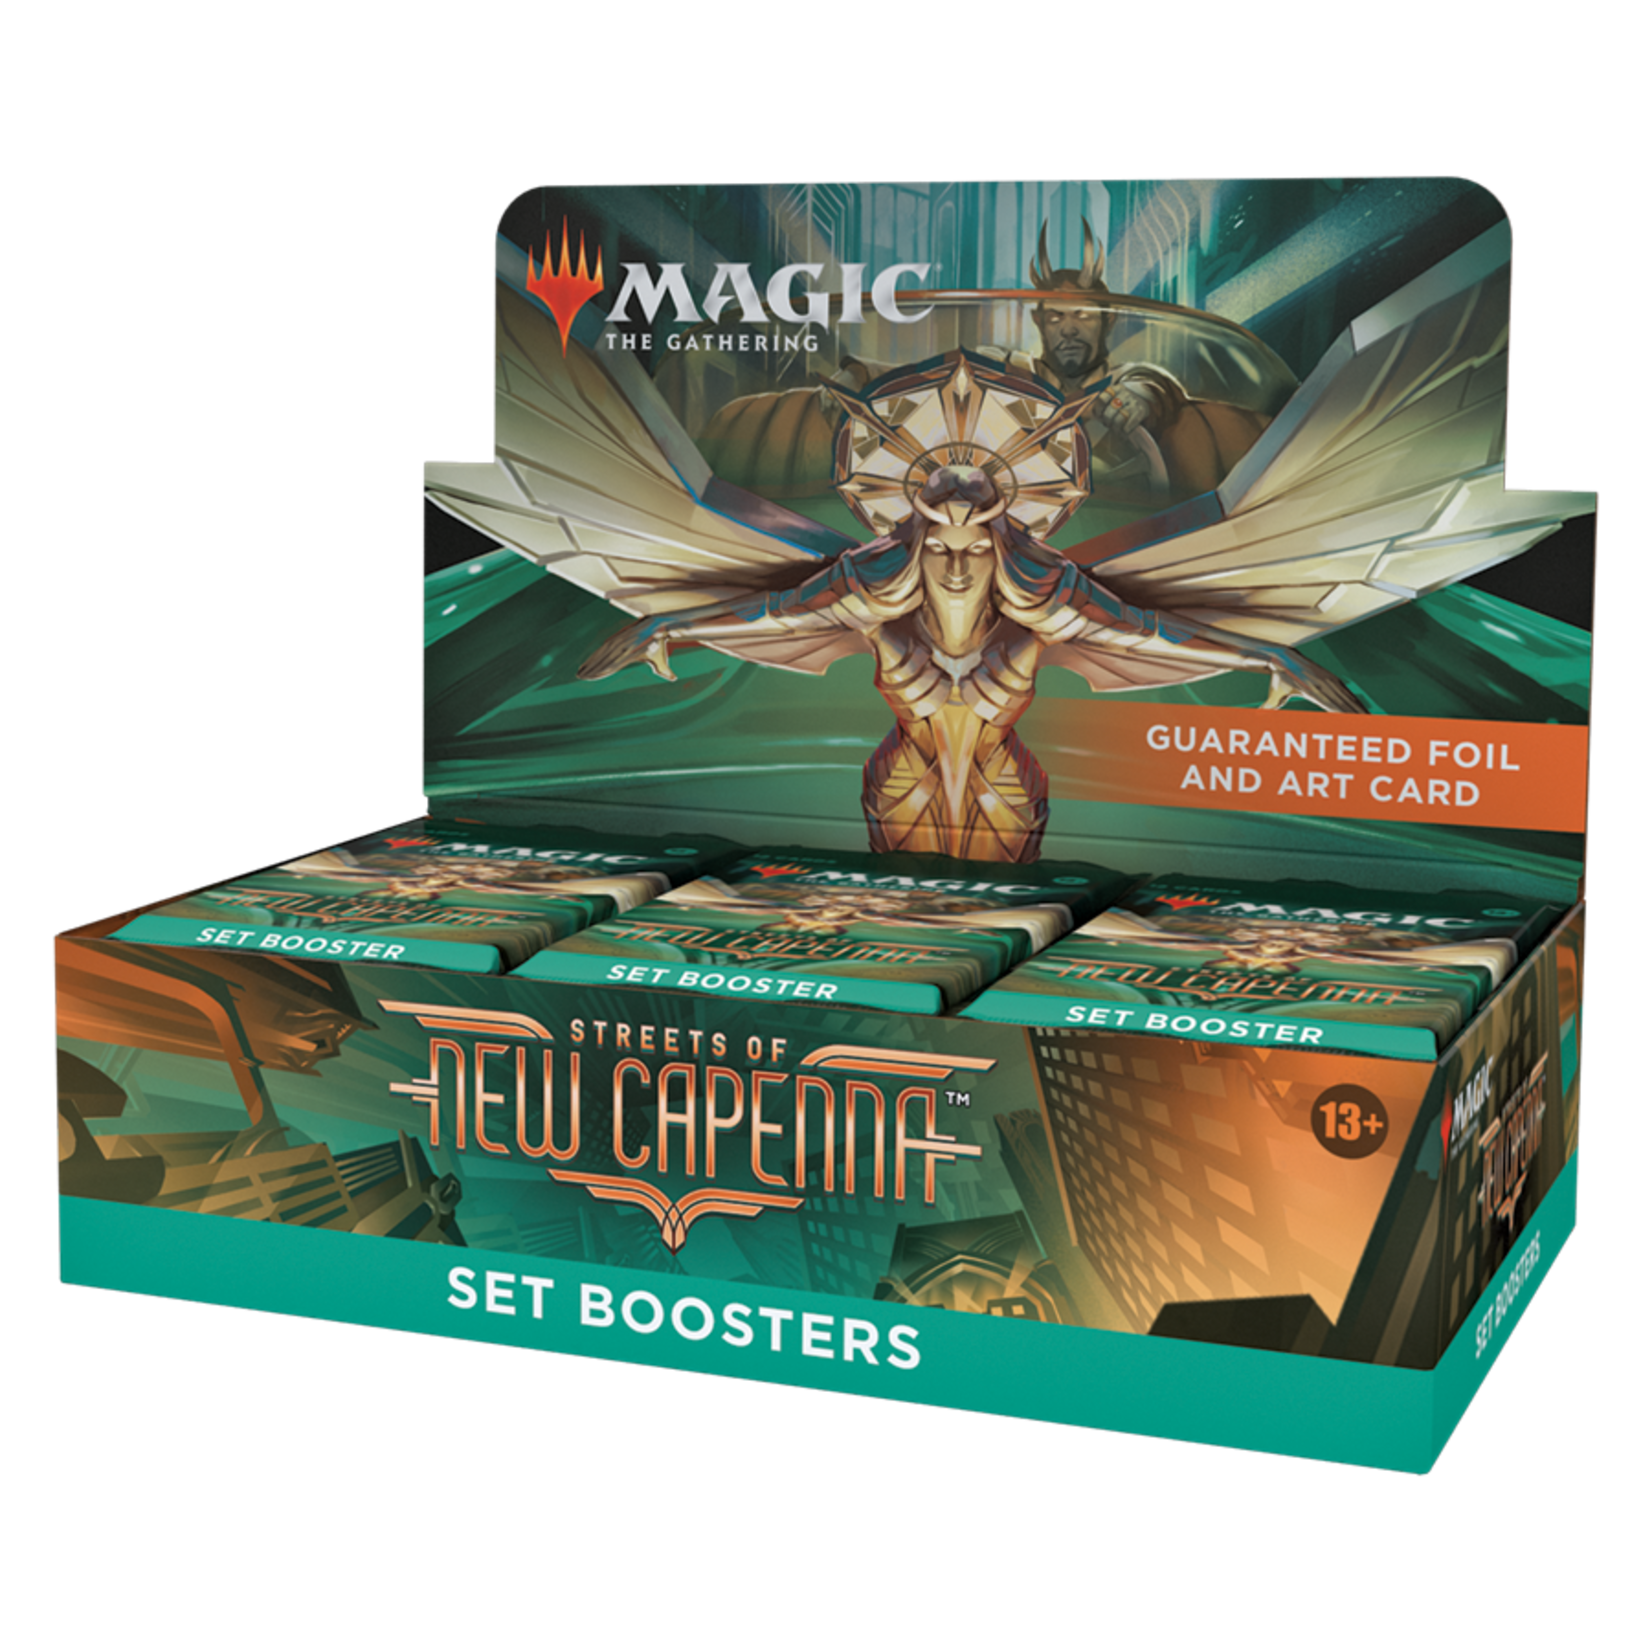 Magic: The Gathering Magic: The Gathering – Streets of New Capenna, Set Booster Box